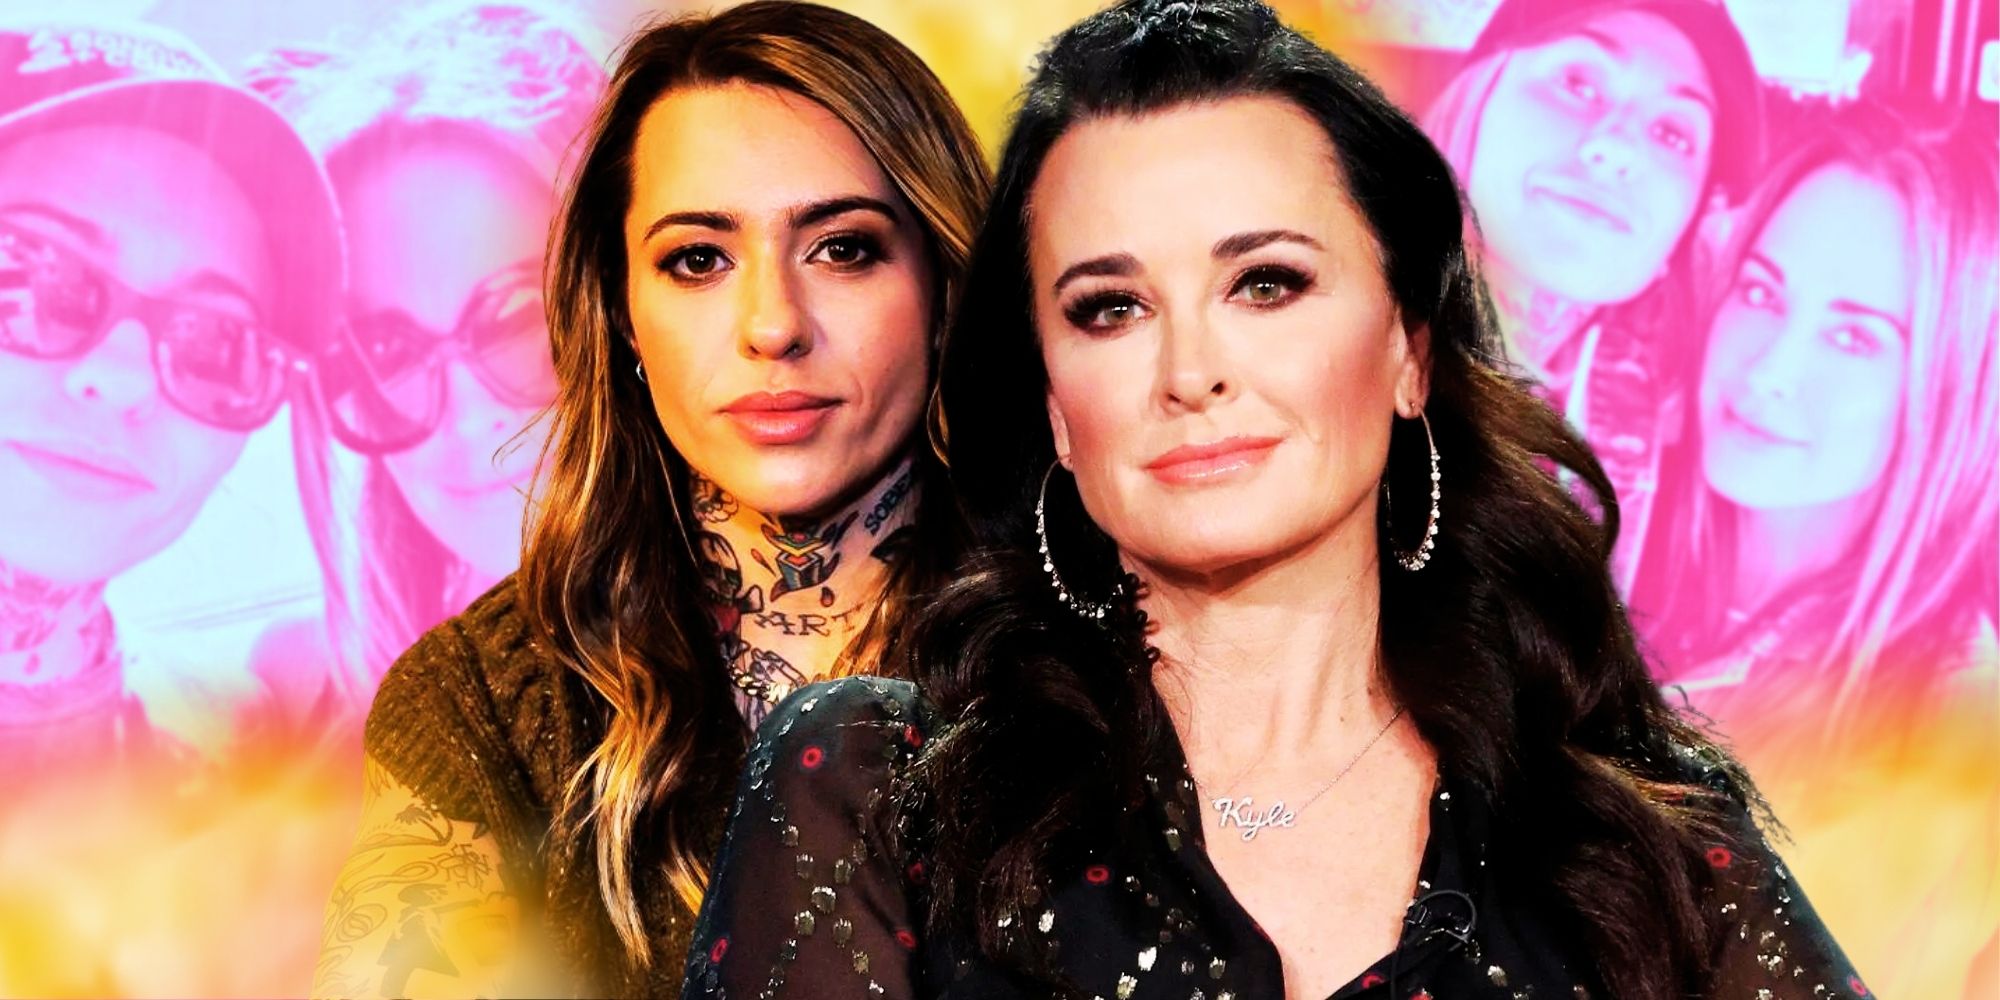 RETITLED_ RHOBH_ Kyle Richards & Morgan Wade's Relationship Explained - Are They More Than Friends